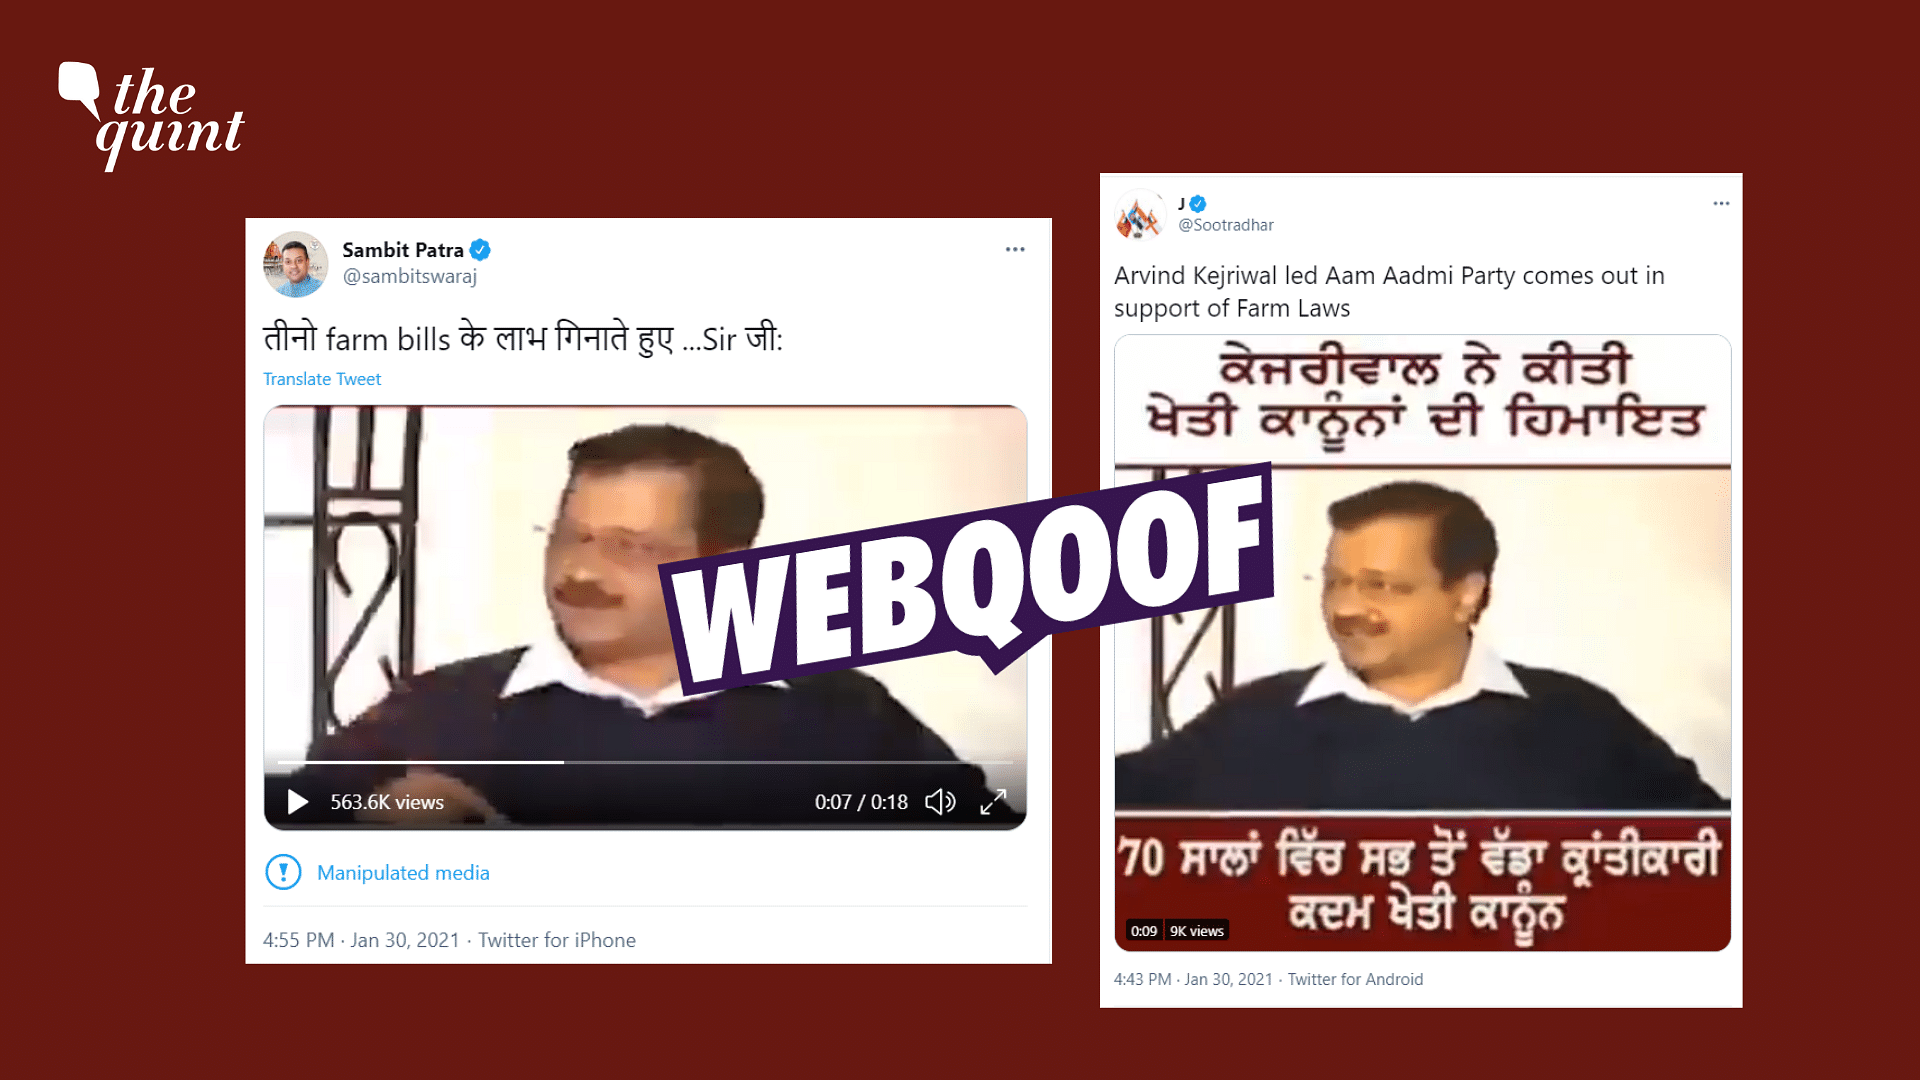 Sections of Kejriwal’s interview were cut out and edited together in the viral video.